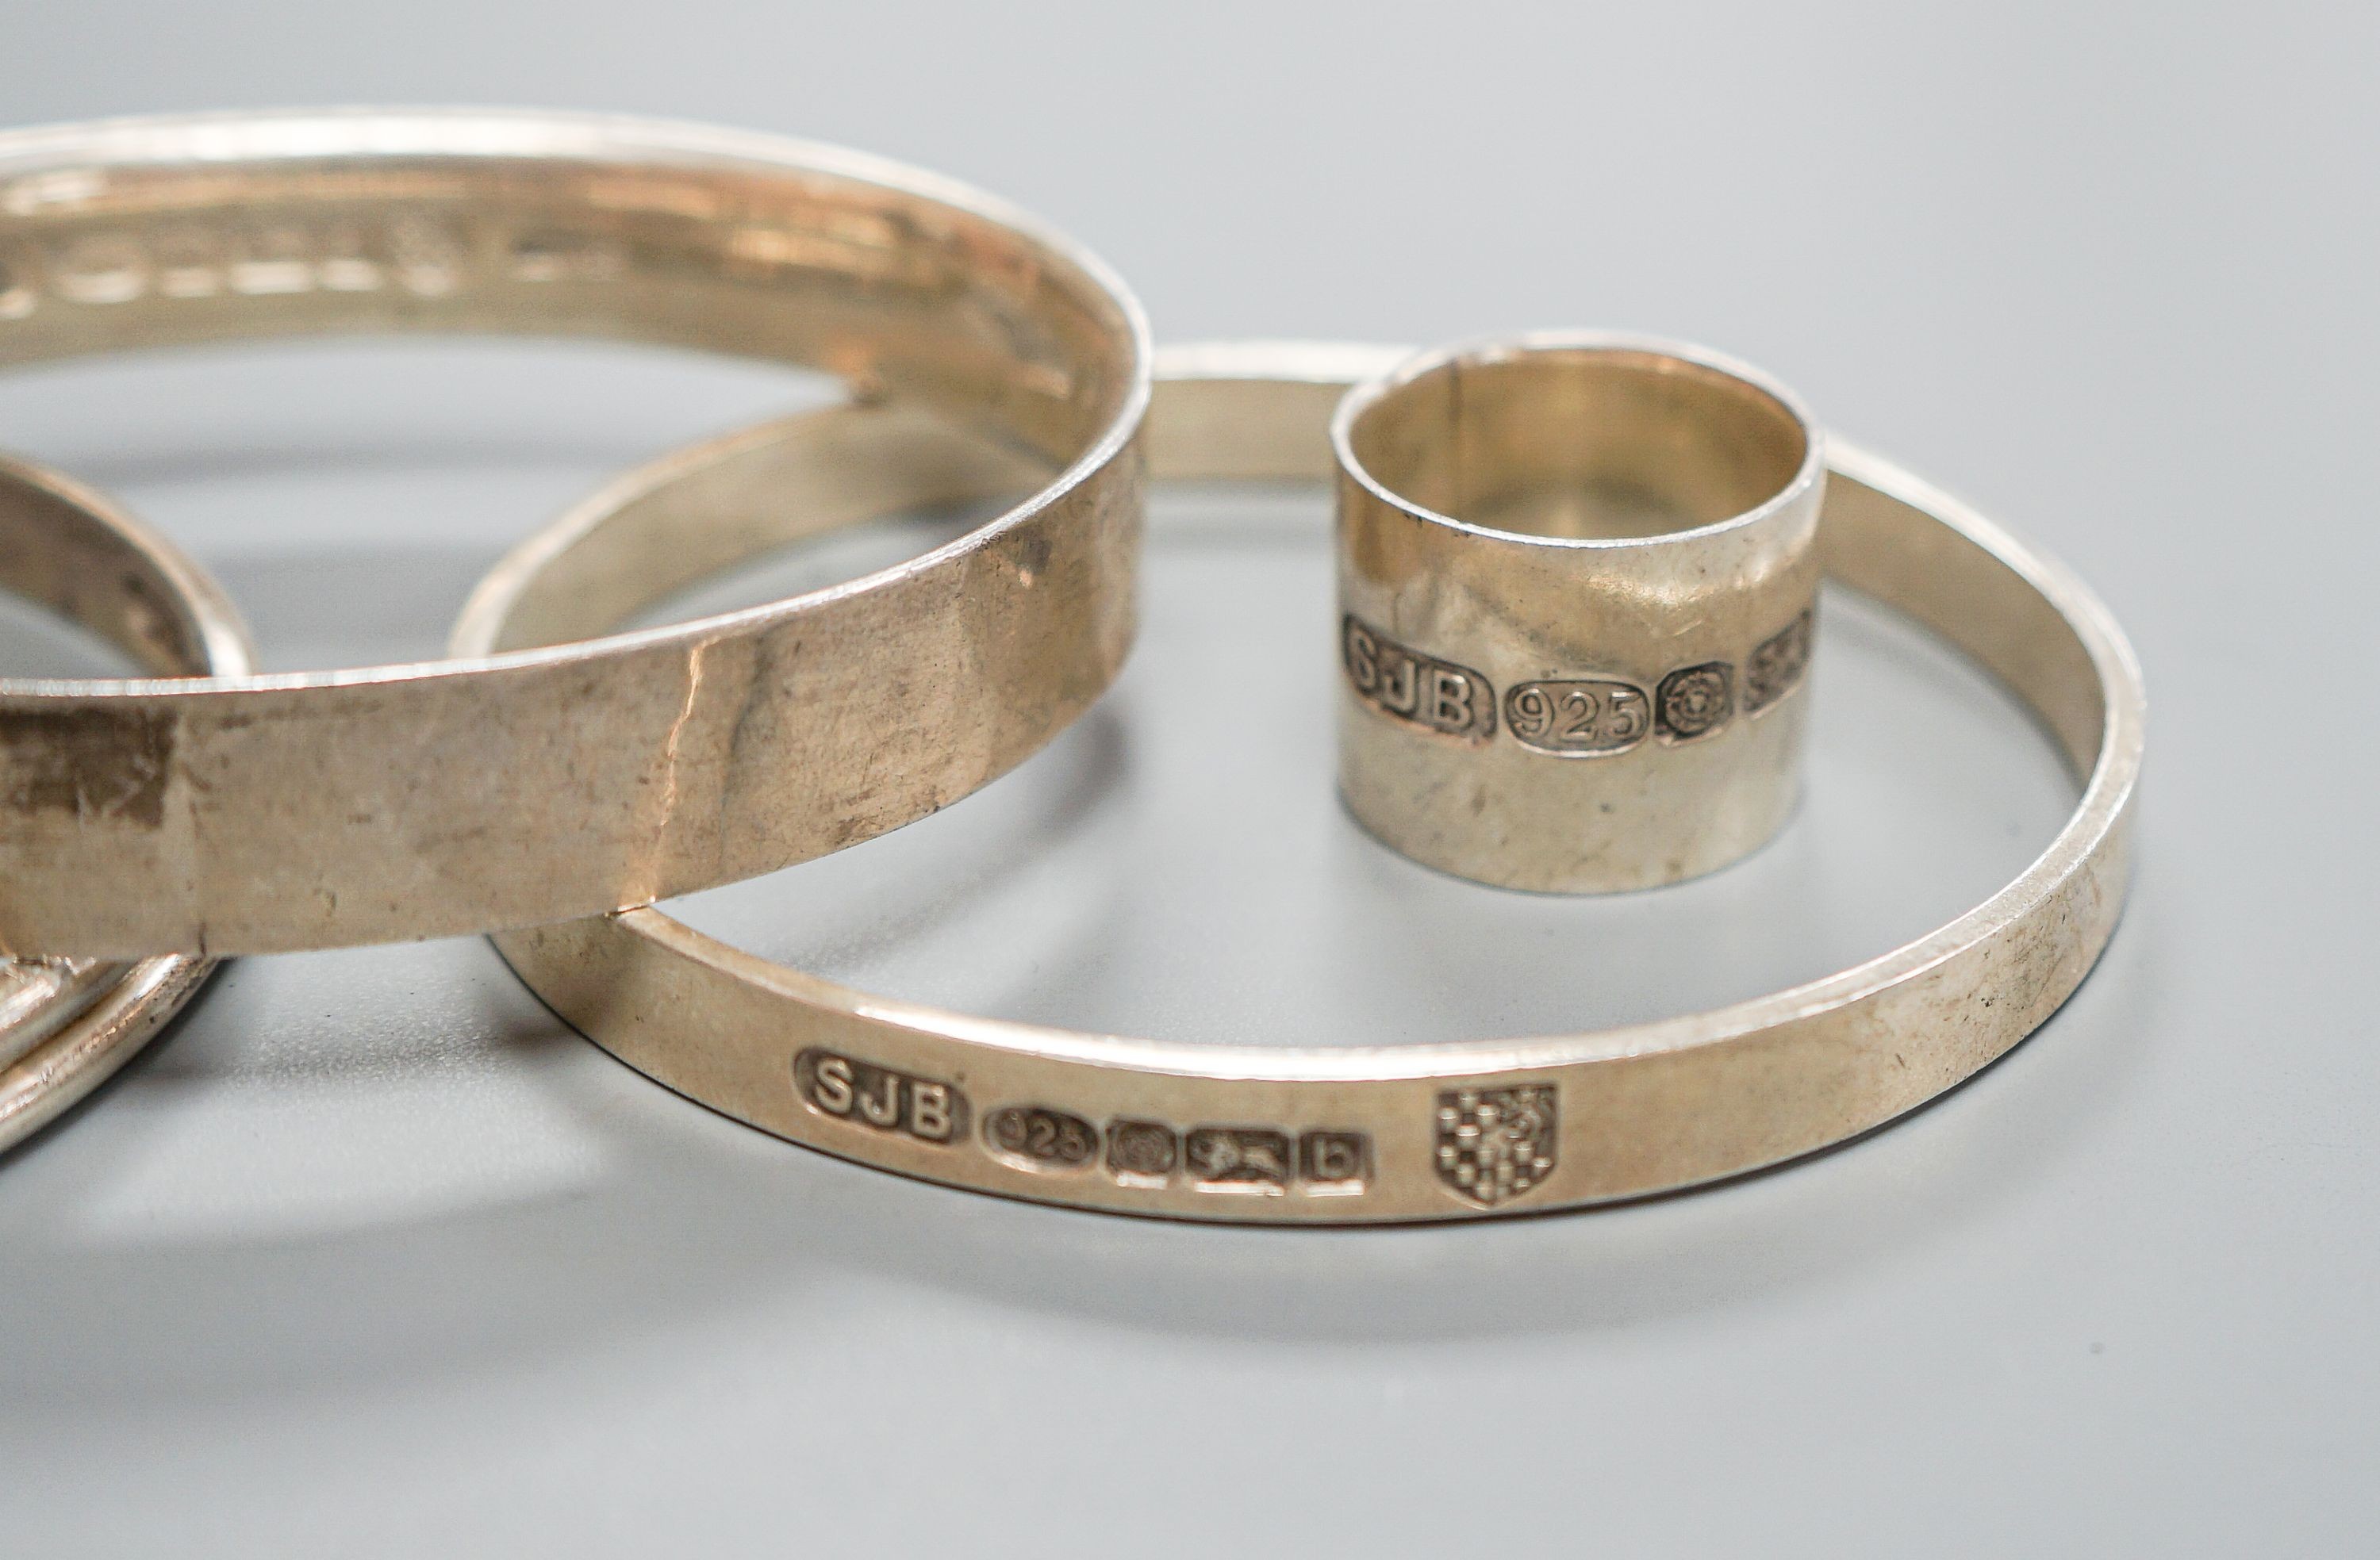 Three modern silver bangles and a large silver band, all by Simon J. Beer of Lewes